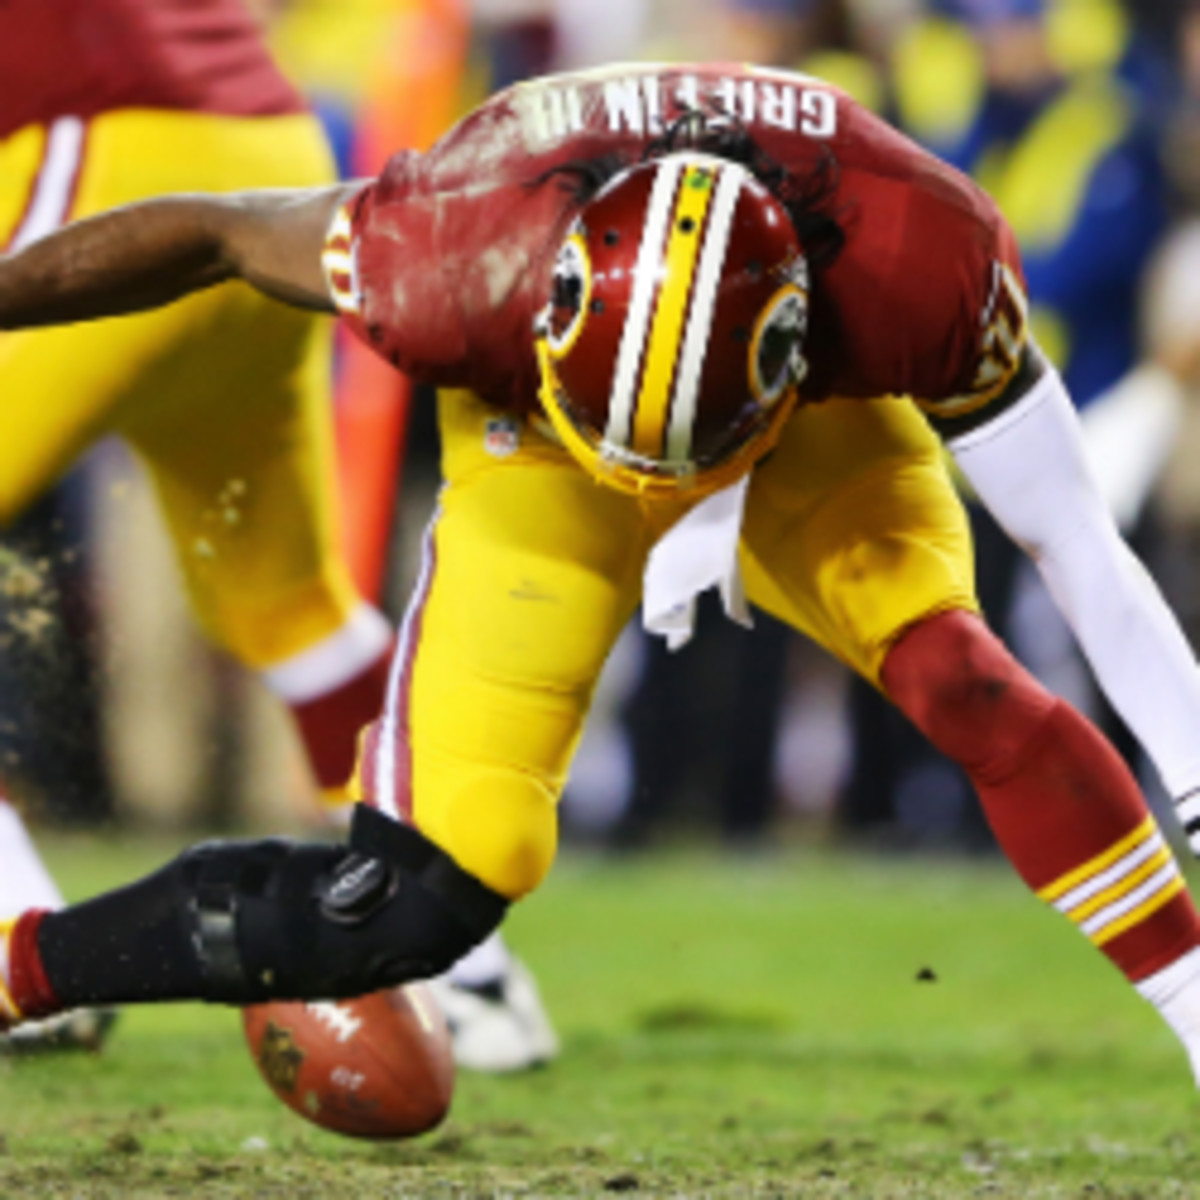 Robert Griffin has a partially torn ACL and MCL, according to a report. (Al Bello/Getty Images)